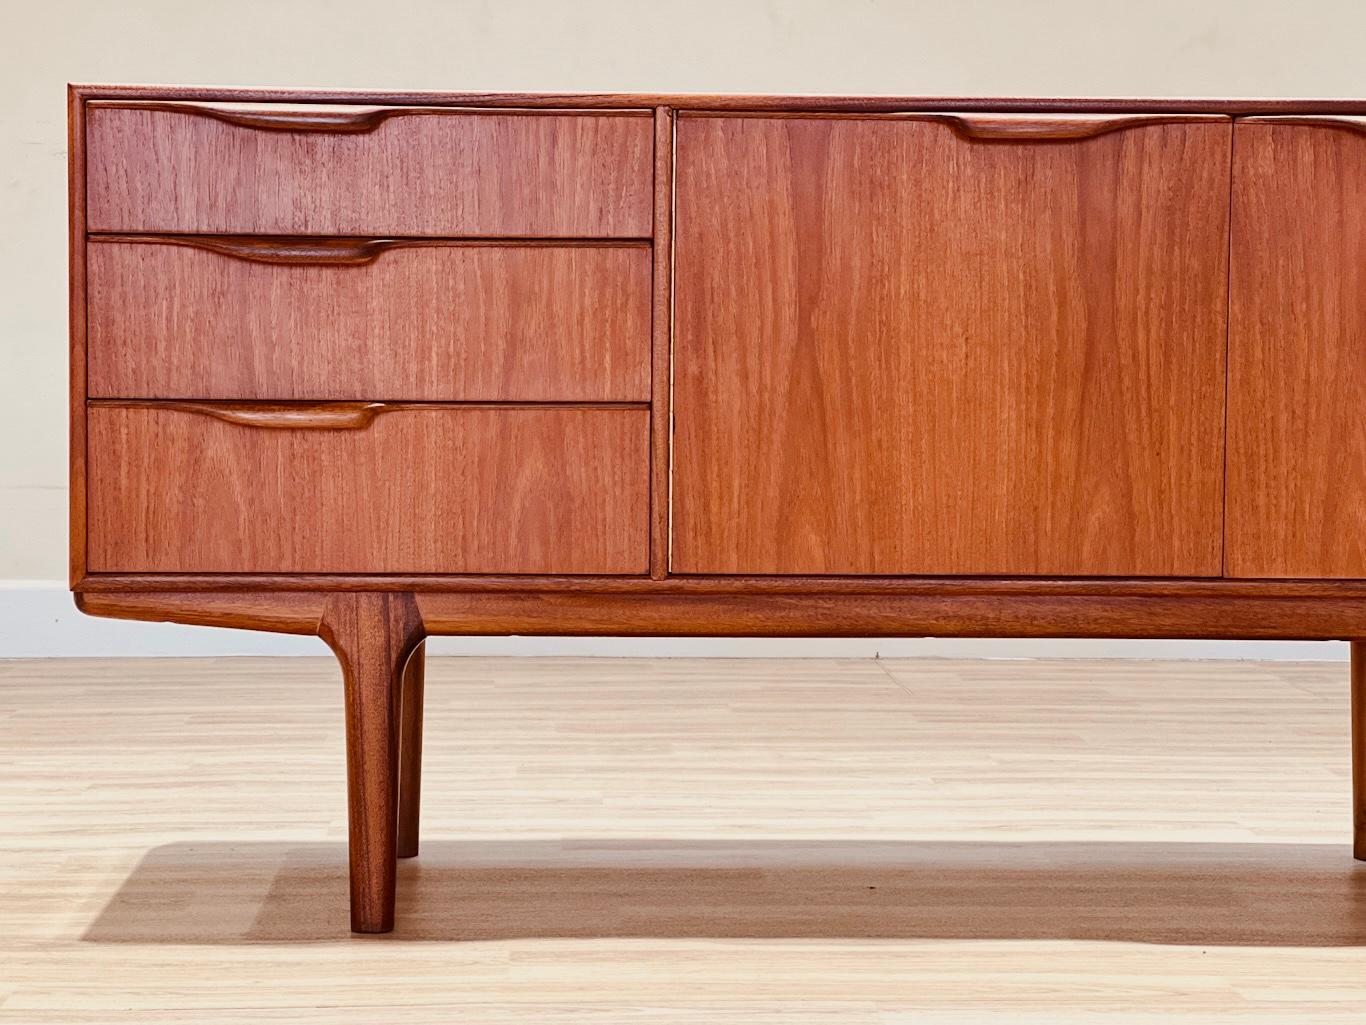 Stunning teak sideboard designed by Tom Robertson for AH McIntosh, included in the Moy collection; collection edited with pieces for small rooms.

This sideboard is similar to the Dunvegan model but with smaller proportions.

Measures

154 x 45